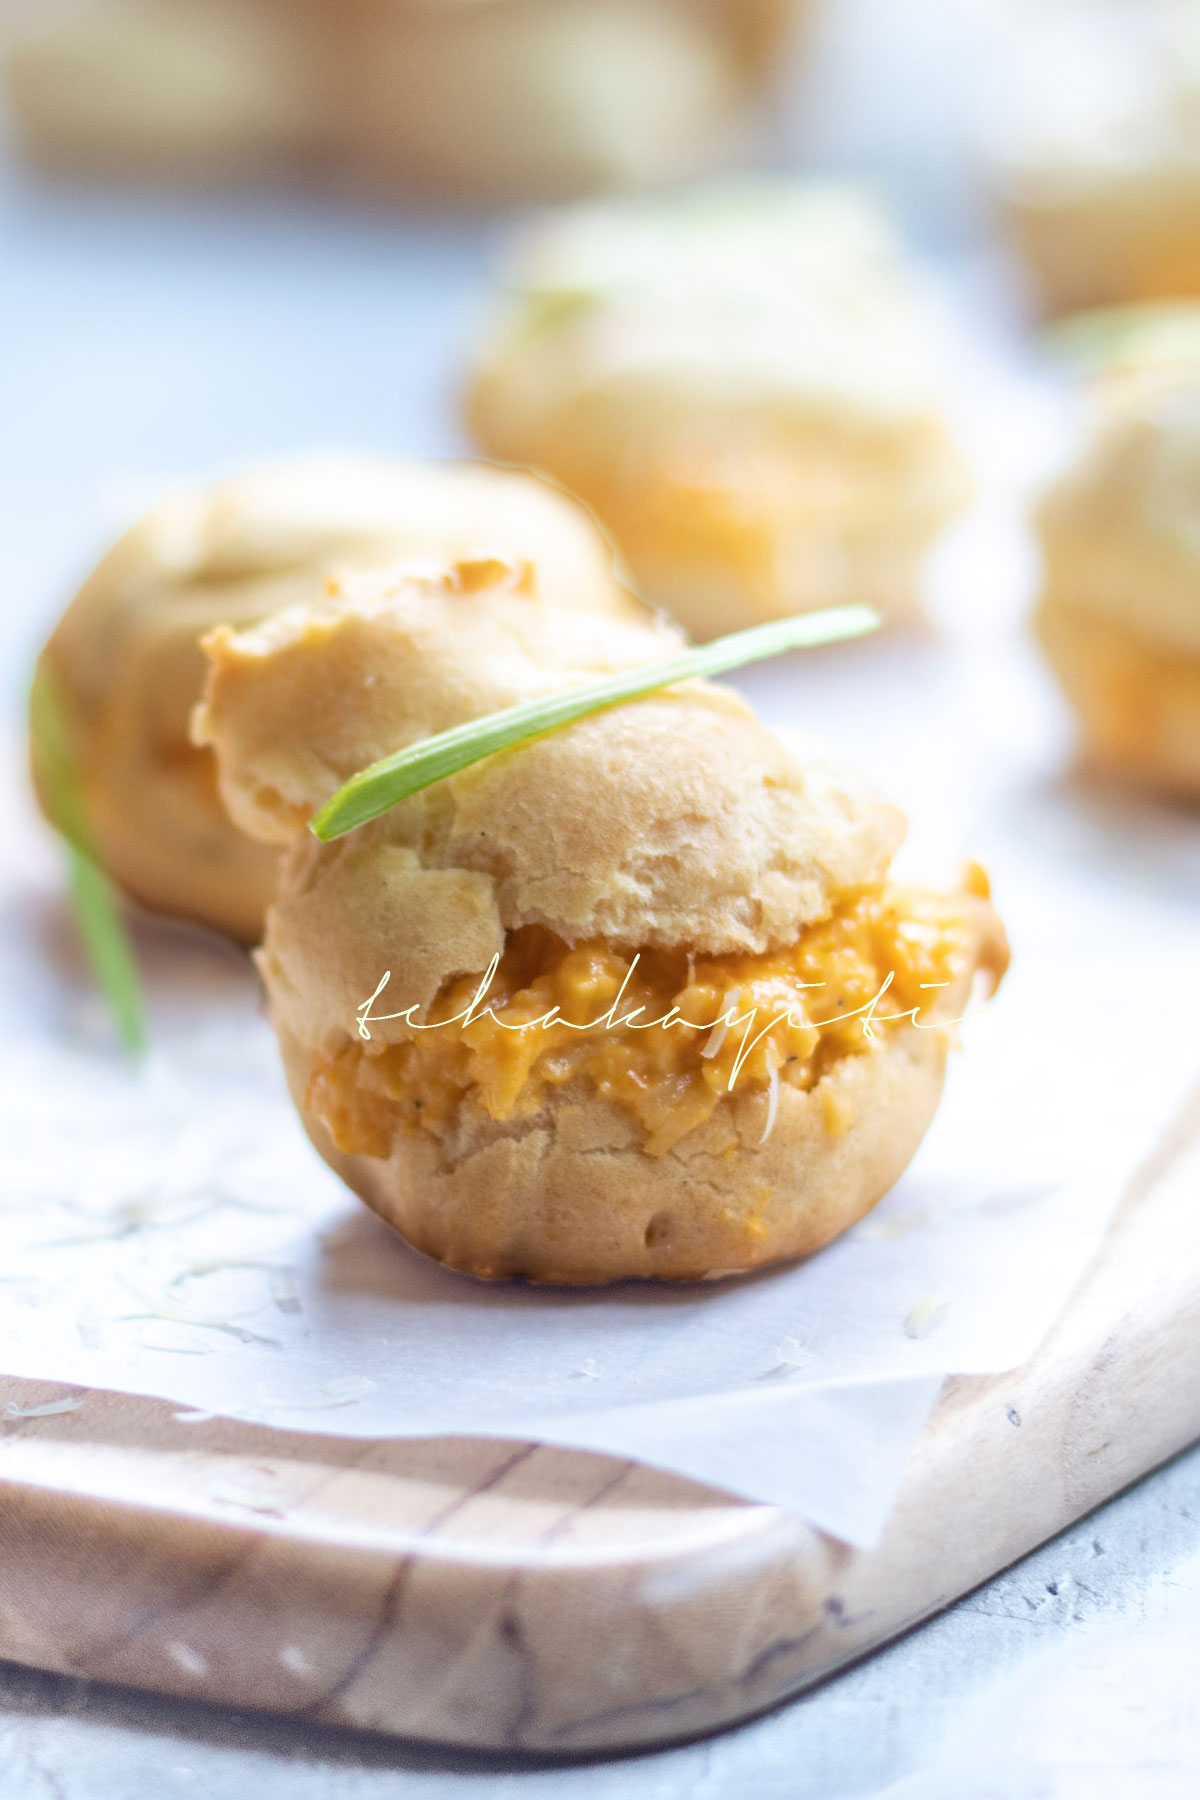 These pâte à choux, or bouchées as we call them, as filled with a spicy cheese spread enhanced with strong aromas of green pepper. They're a must on your appetizer menu.